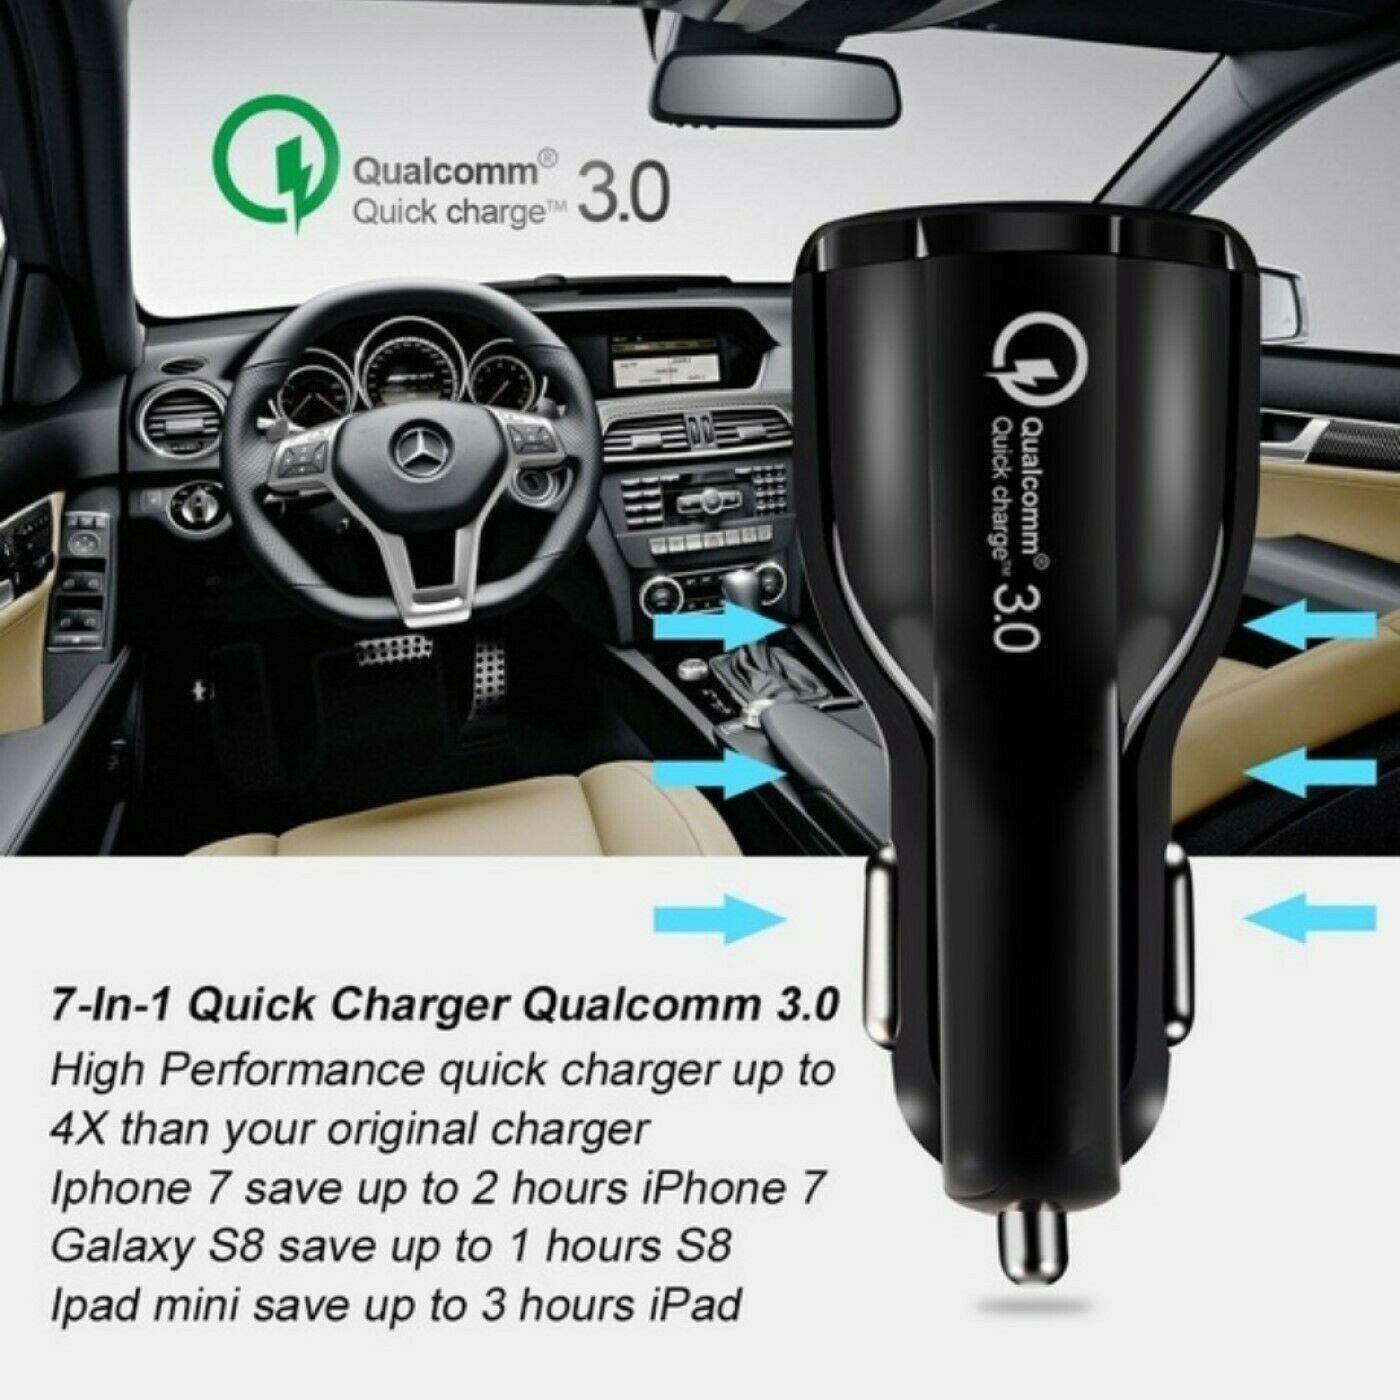 2 Pack PBG 2 Port USB Fast Car Charger Adapter For Devices